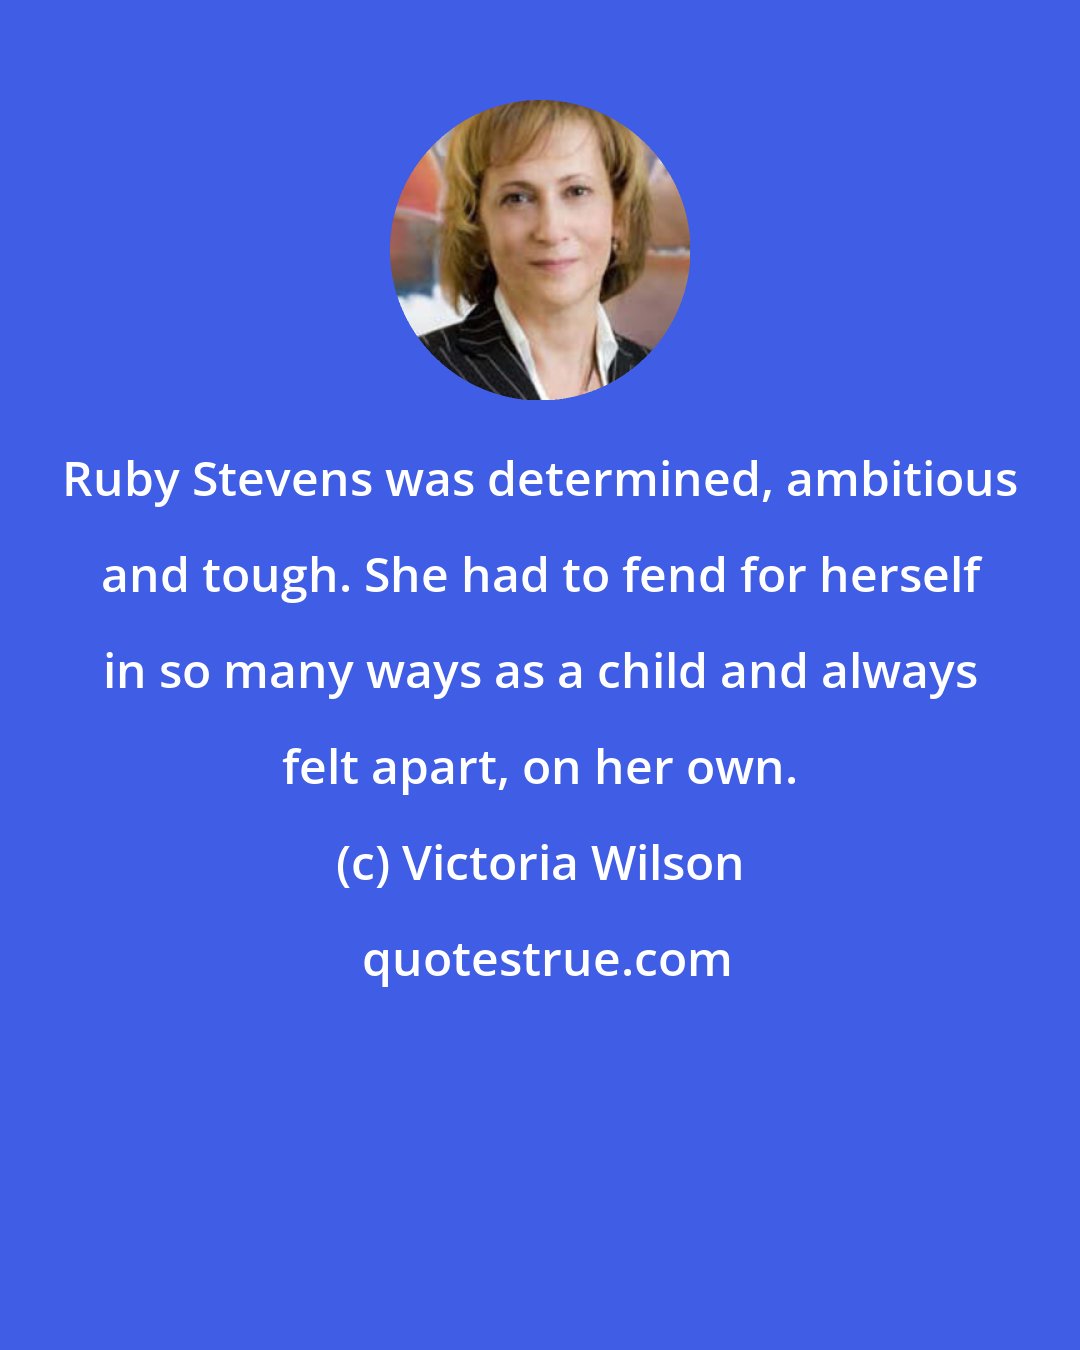 Victoria Wilson: Ruby Stevens was determined, ambitious and tough. She had to fend for herself in so many ways as a child and always felt apart, on her own.